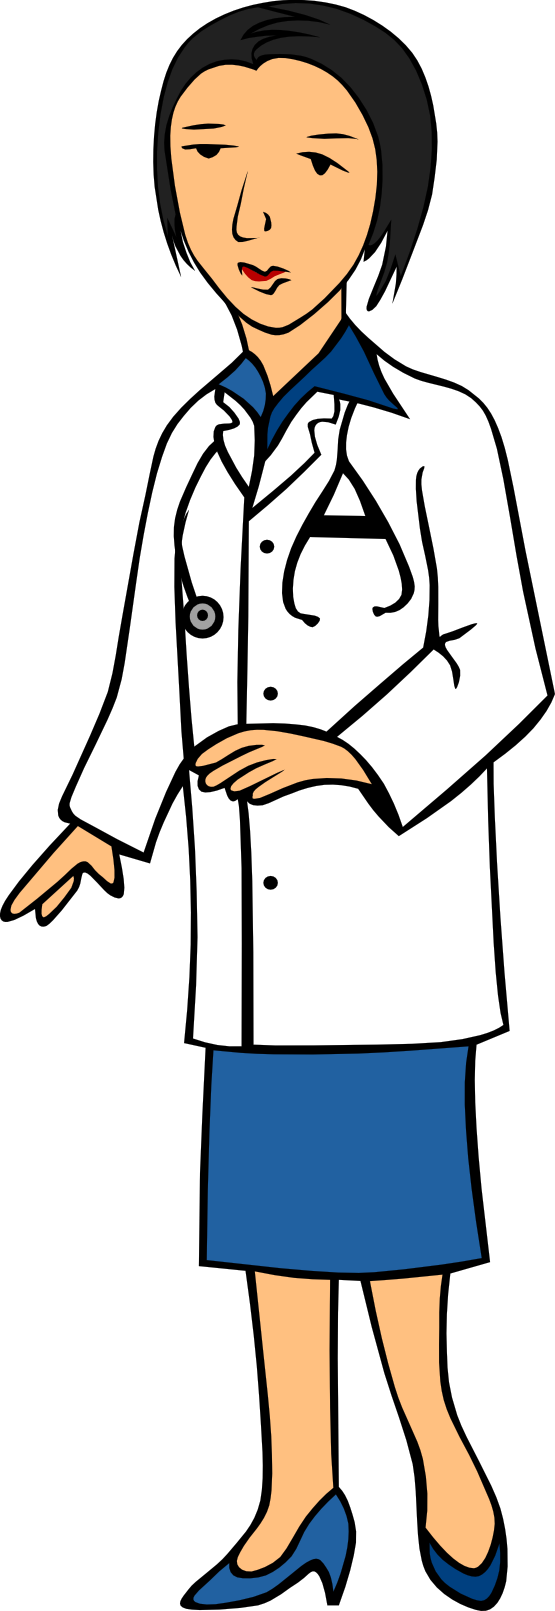 doctor clipart free download - photo #39